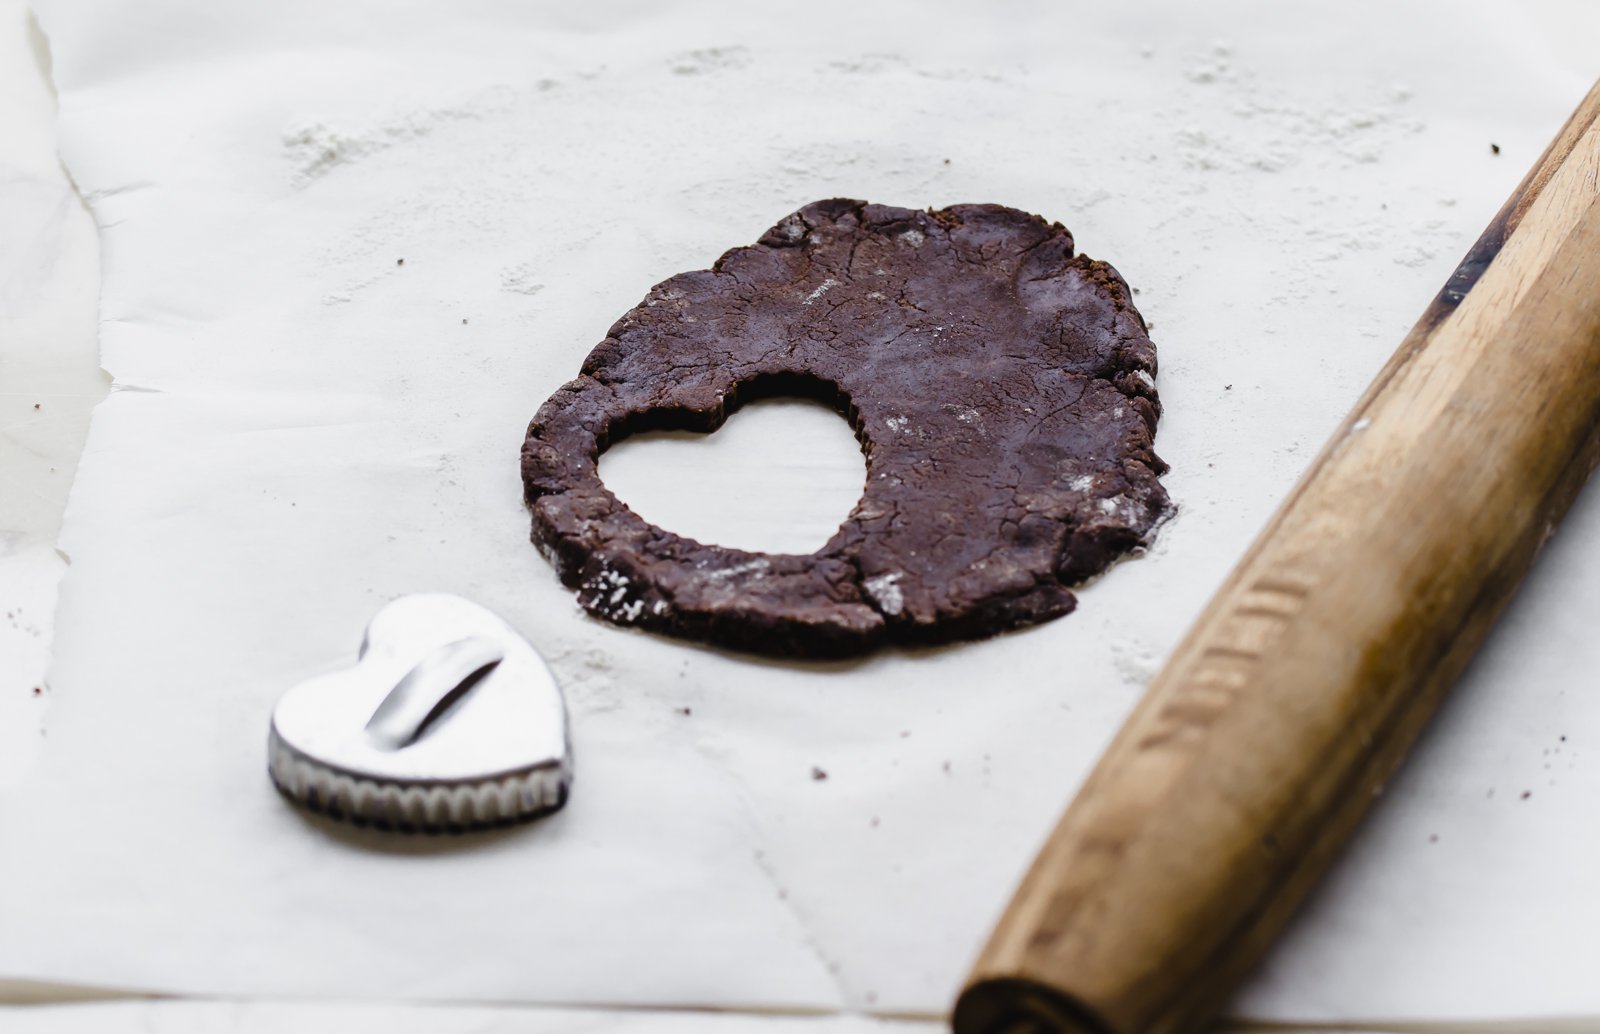 A heart cookie cutter next to rolled out chocolate cookie dough with a rolling pin on the side.